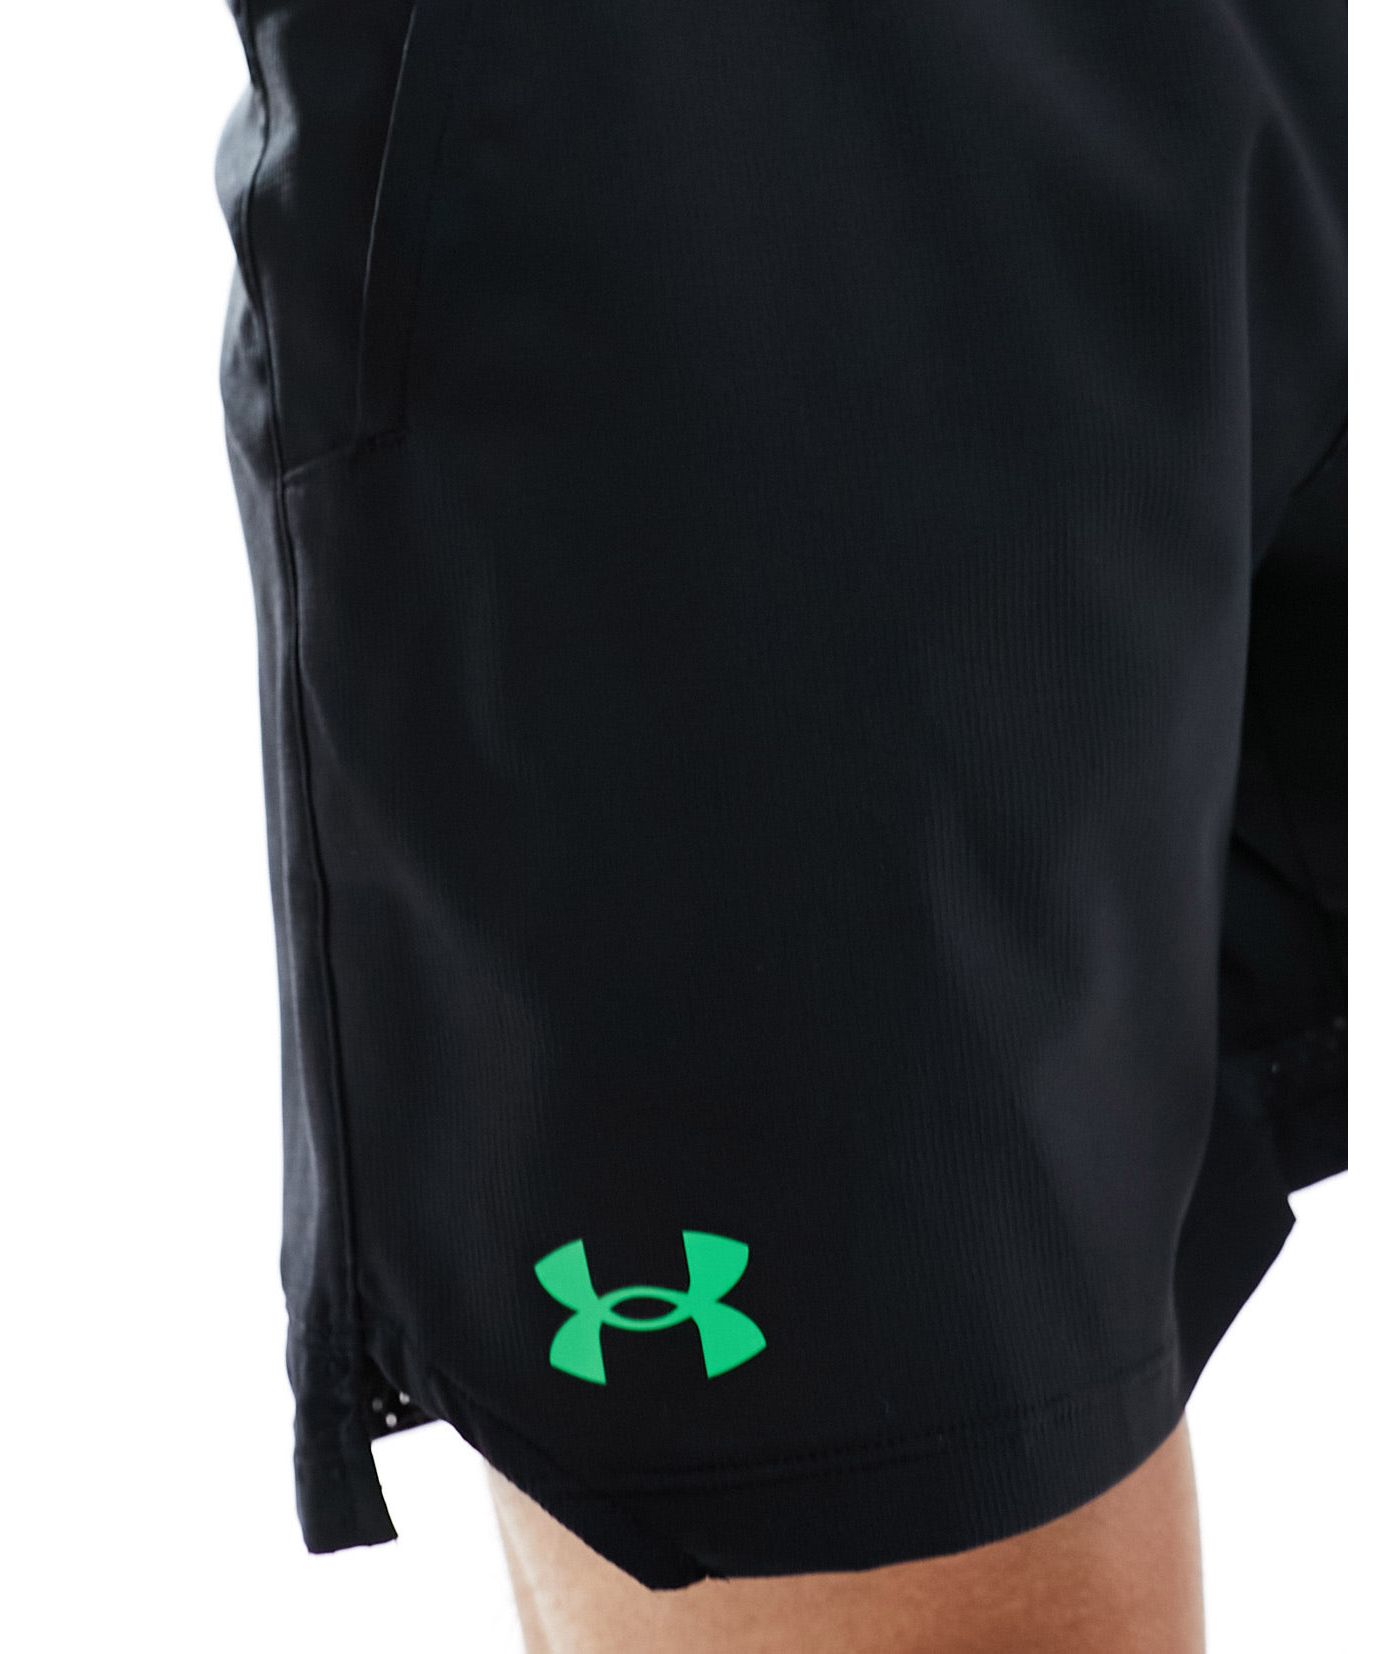 Under Armour Vanish woven 6 inch shorts in black and green